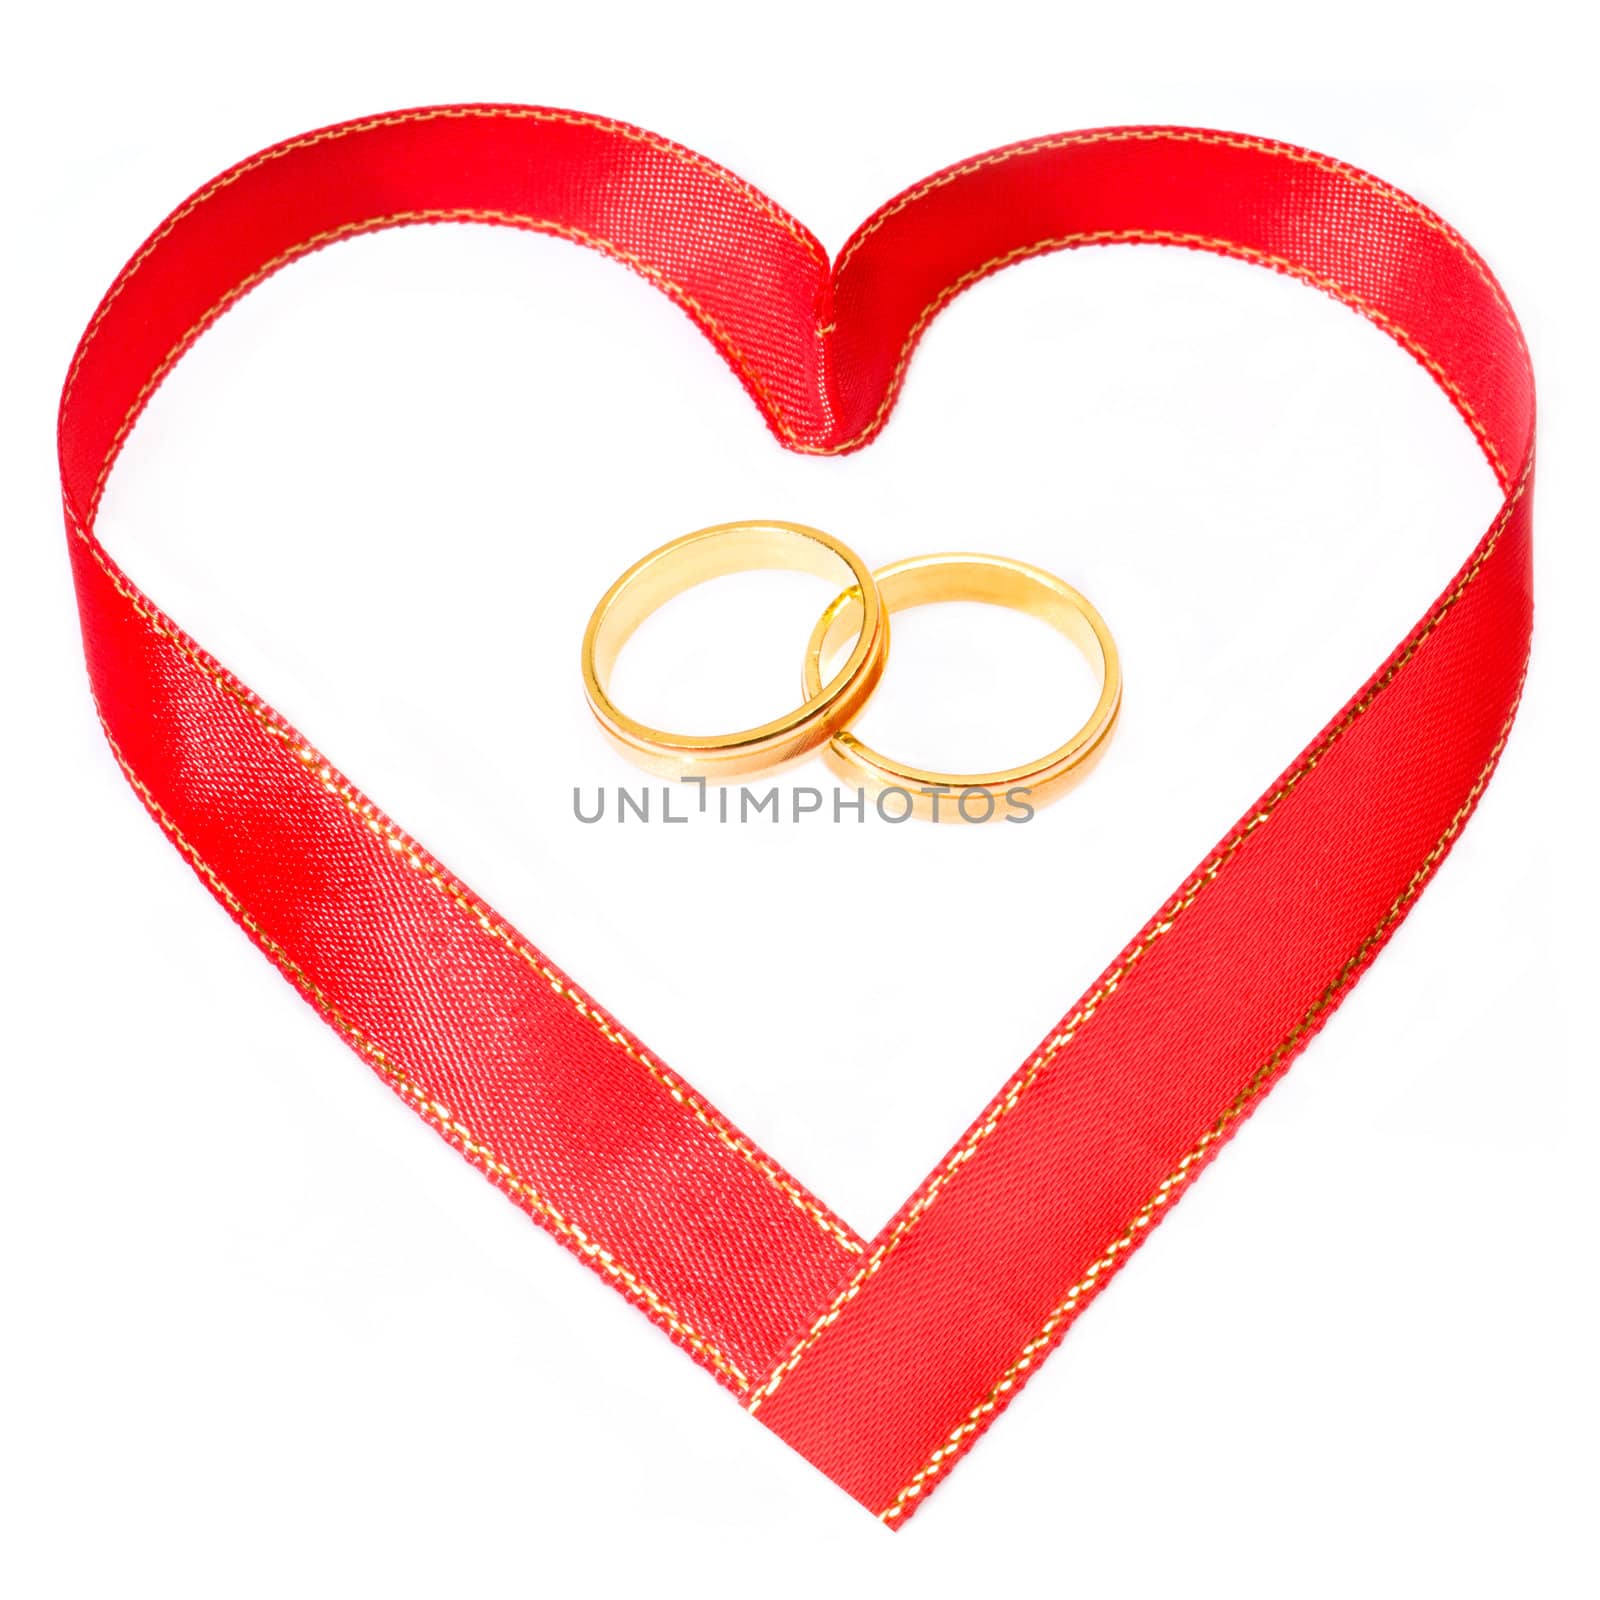 Two golden rings in side a red gold heart shape ribbon